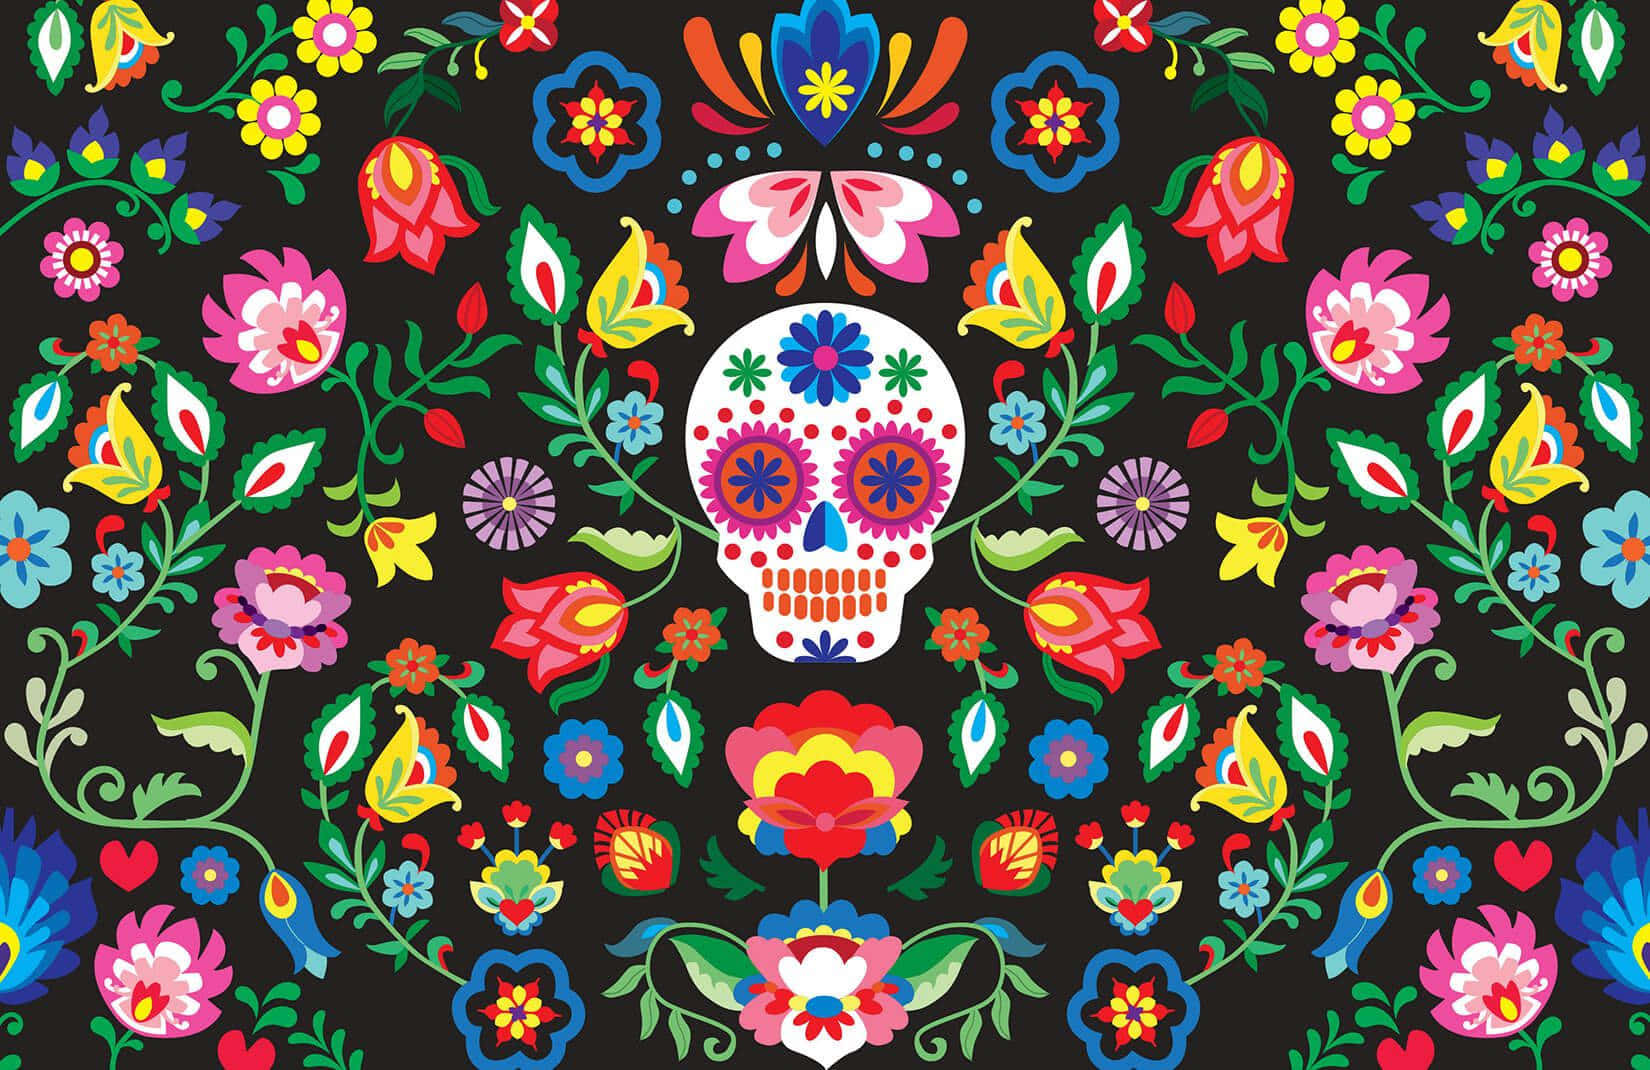 A Colorful Sugar Skull With Flowers On A Black Background Wallpaper